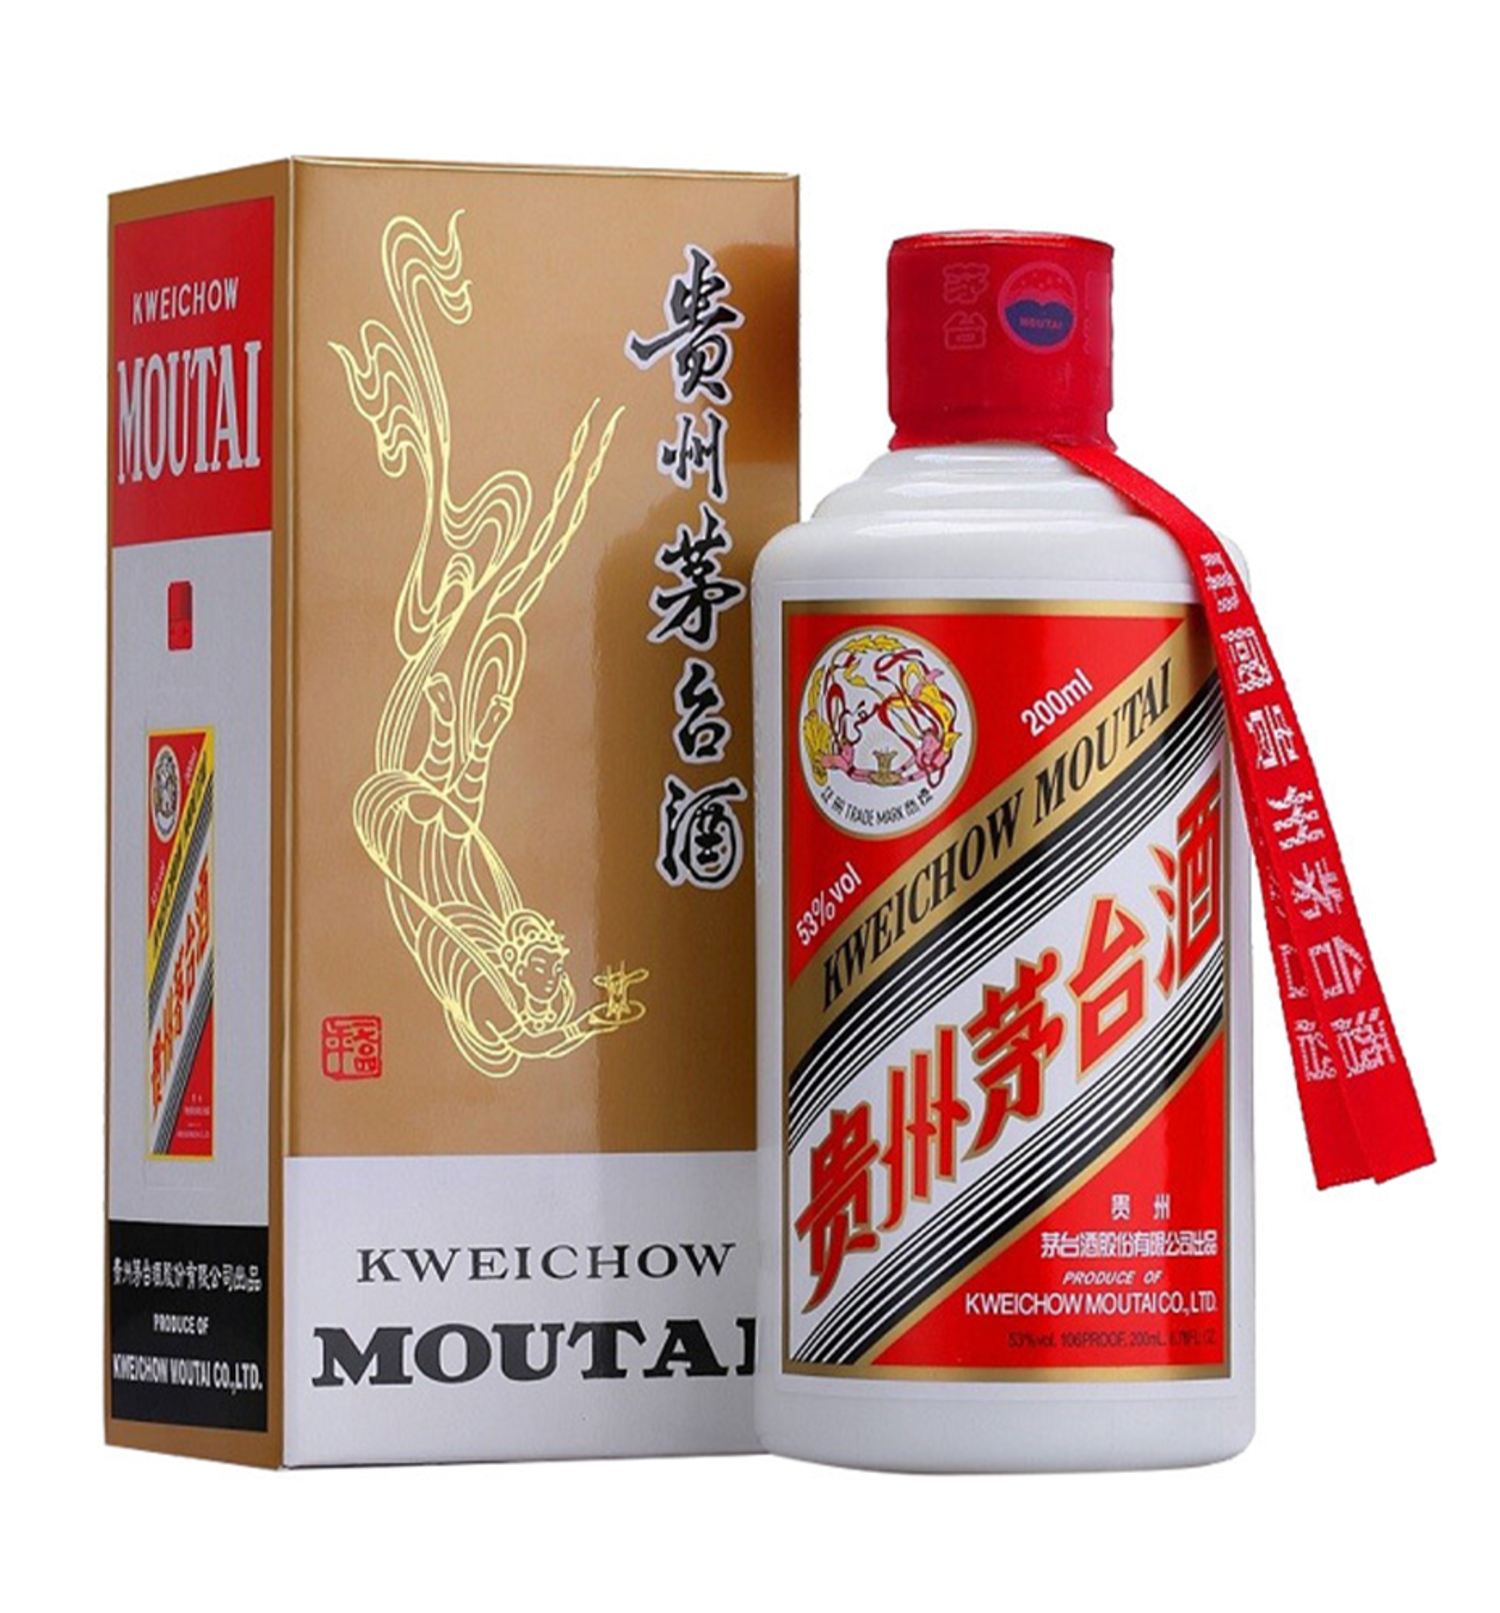 Moutai 贵州茅台200ml 2016 $529 FREE DELIVERY - Uncle Fossil